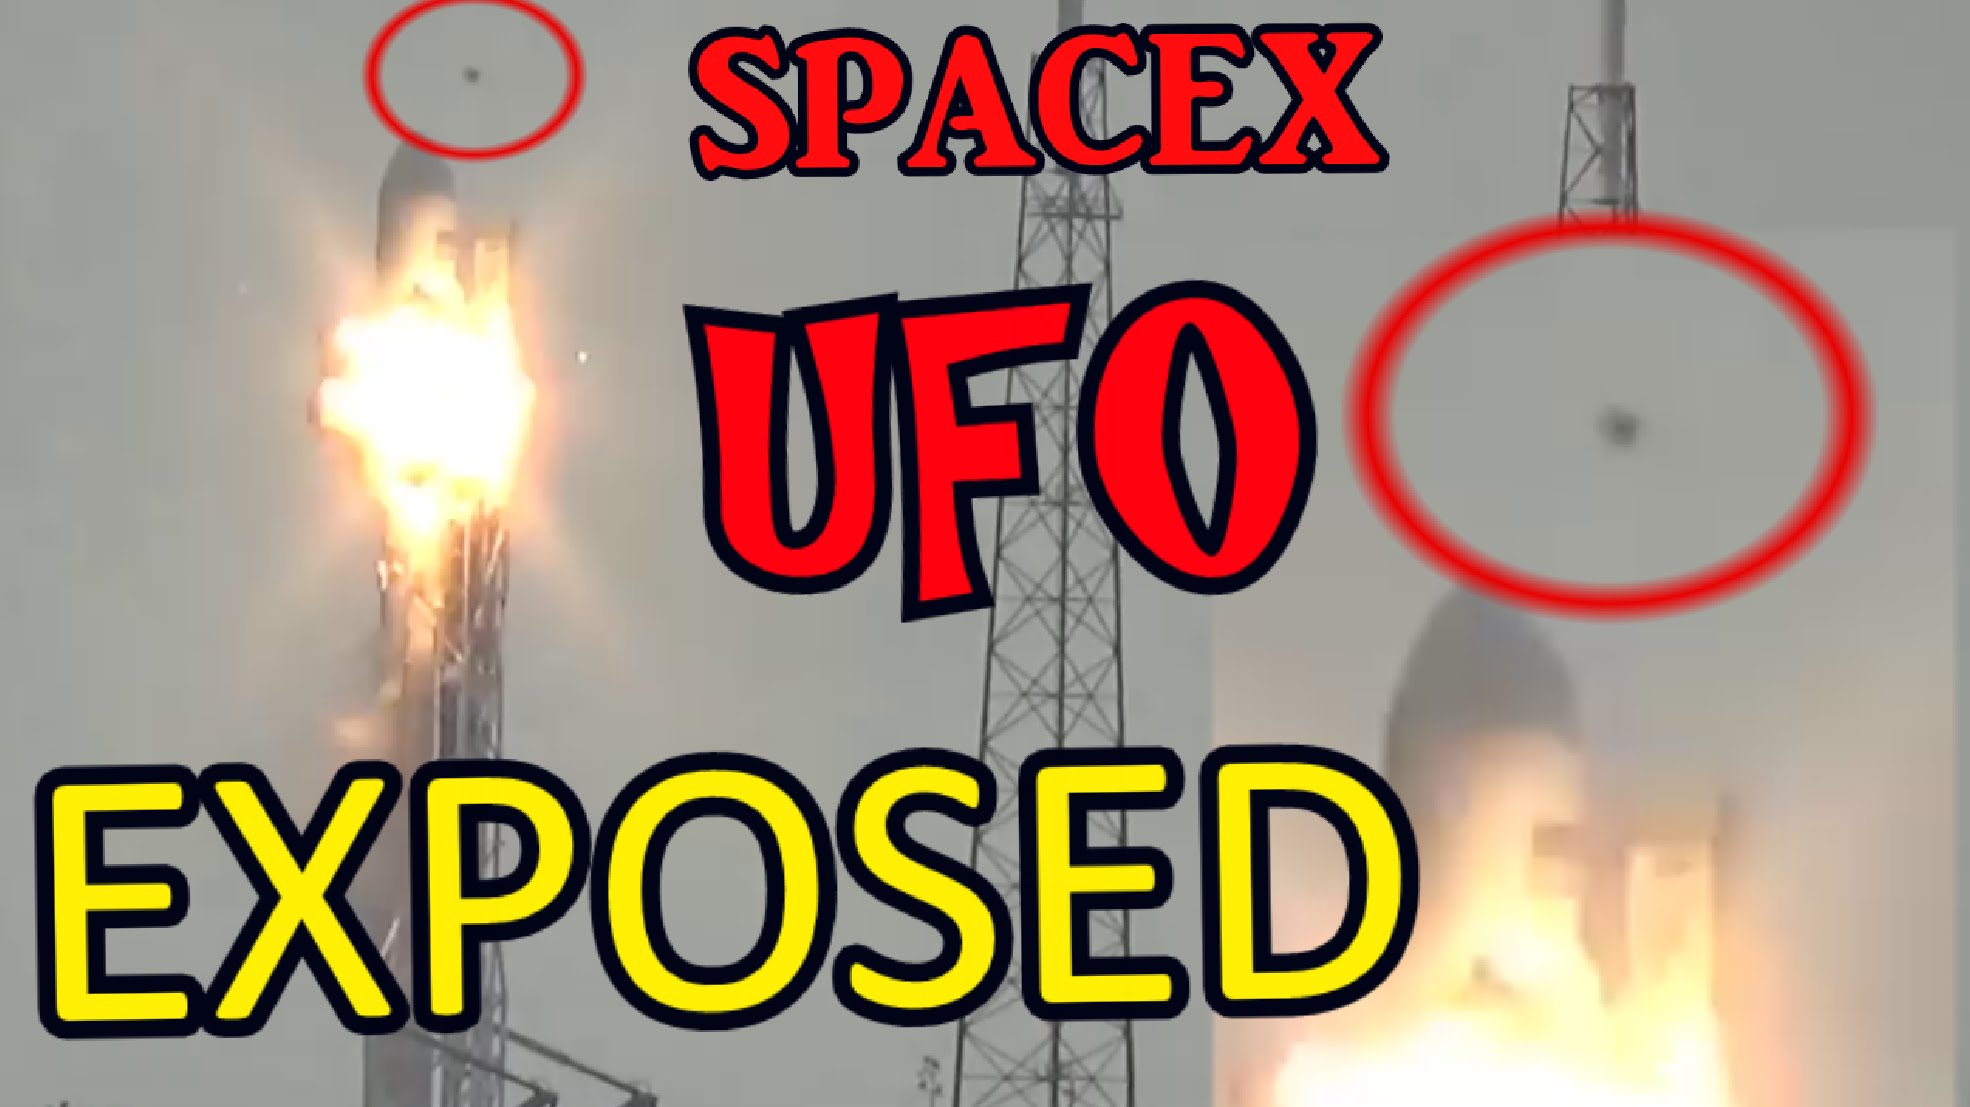 SpaceX UFO Explosion EXPOSED!!!